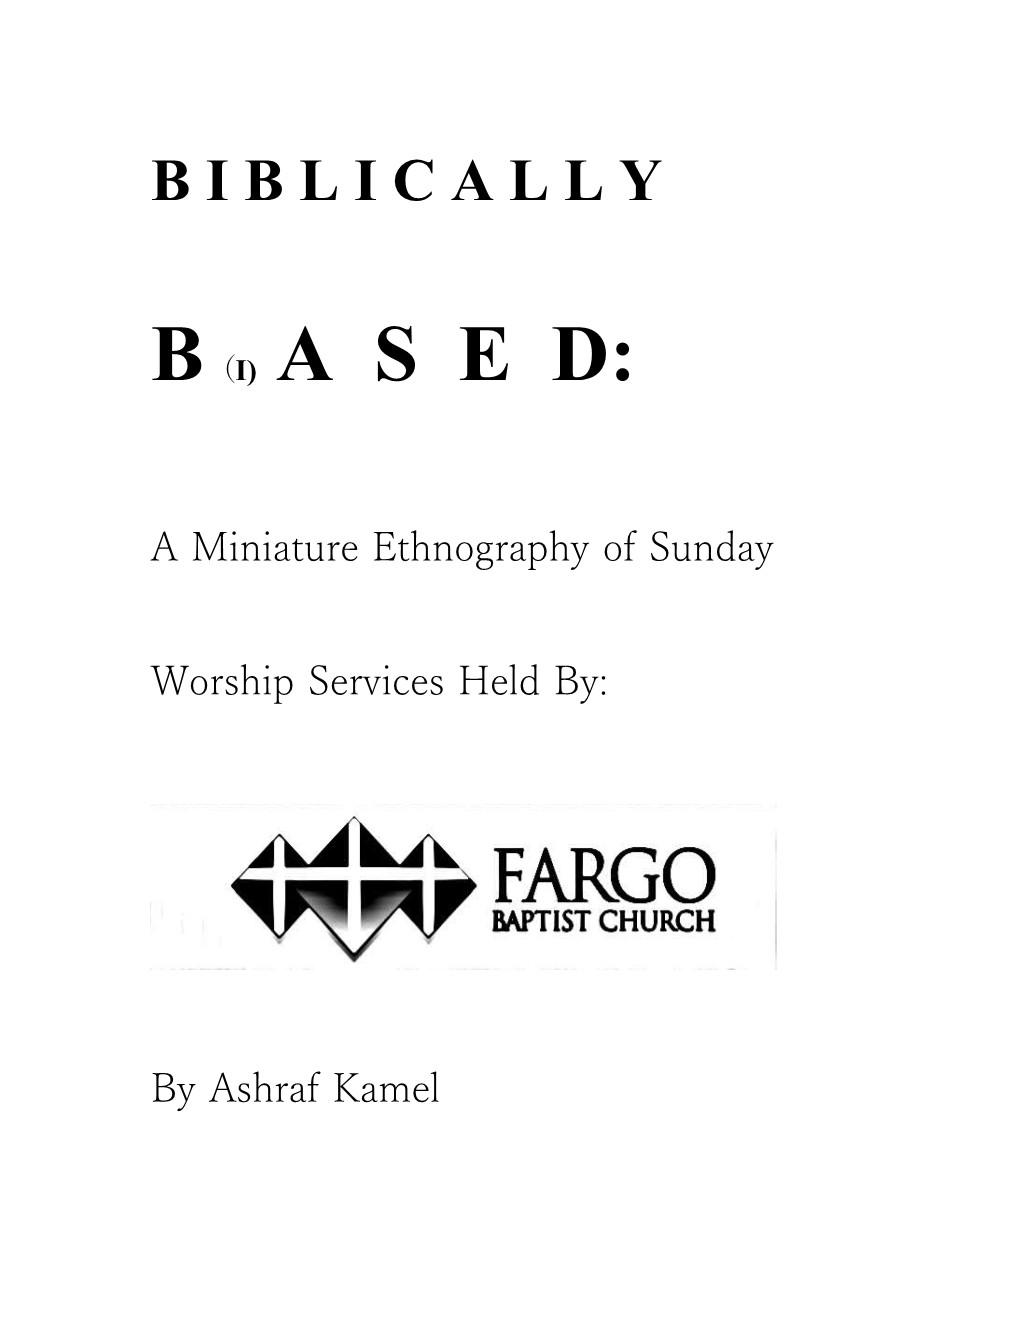 A Miniature Ethnography of Sunday Worship Services Held By